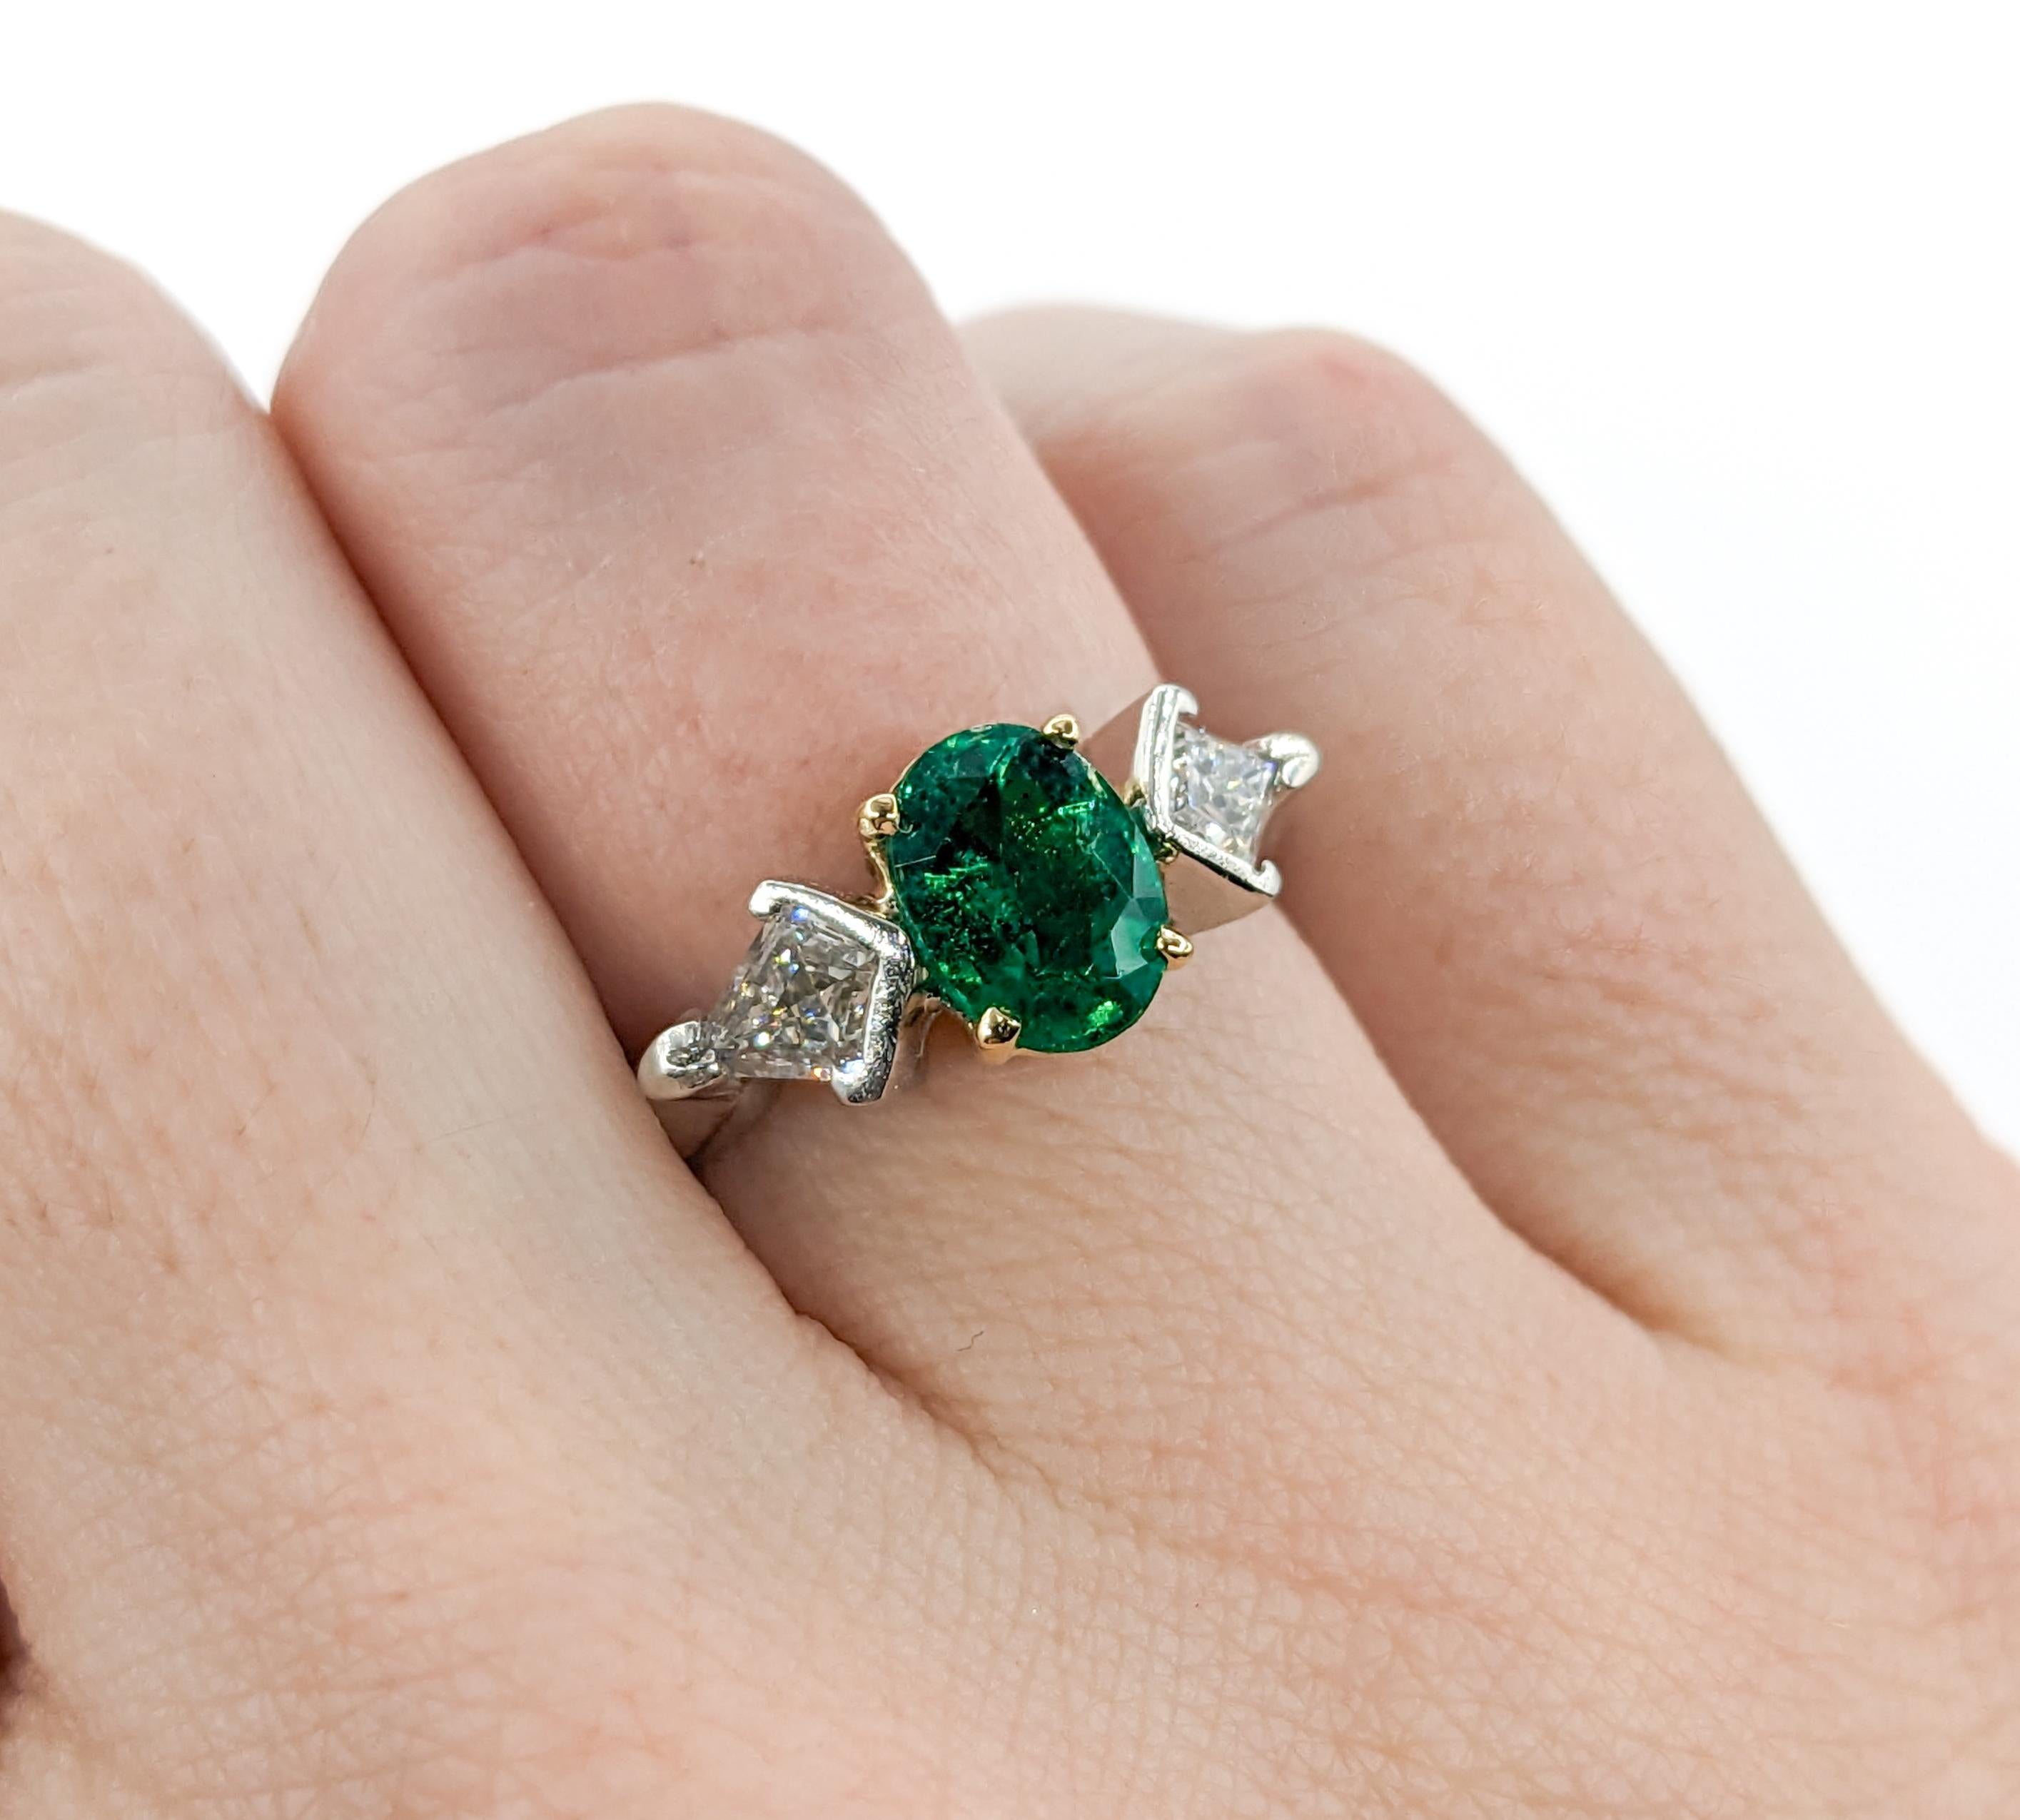 Emerald & Kite Shape Diamond Ring In Platinum In Excellent Condition For Sale In Bloomington, MN